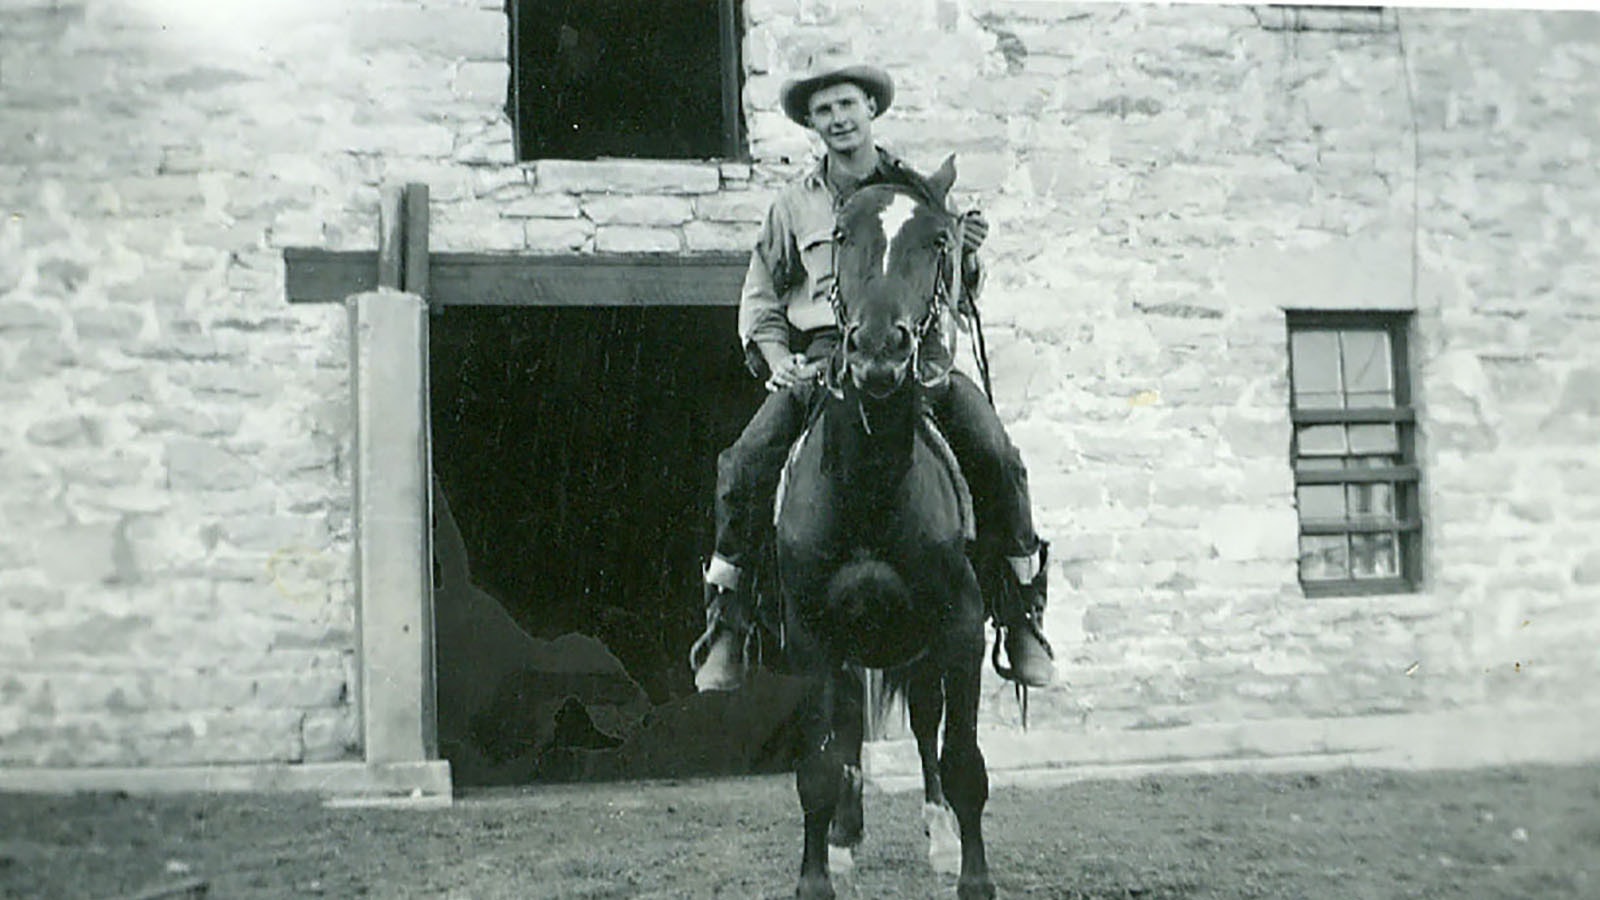 Frank Miller, a 2022 Wyoming Cowboy Hall Of Fame inductee, spent 55 years on horses moving sheep and cattle on his family's multi-generation ranch in Carbon County.